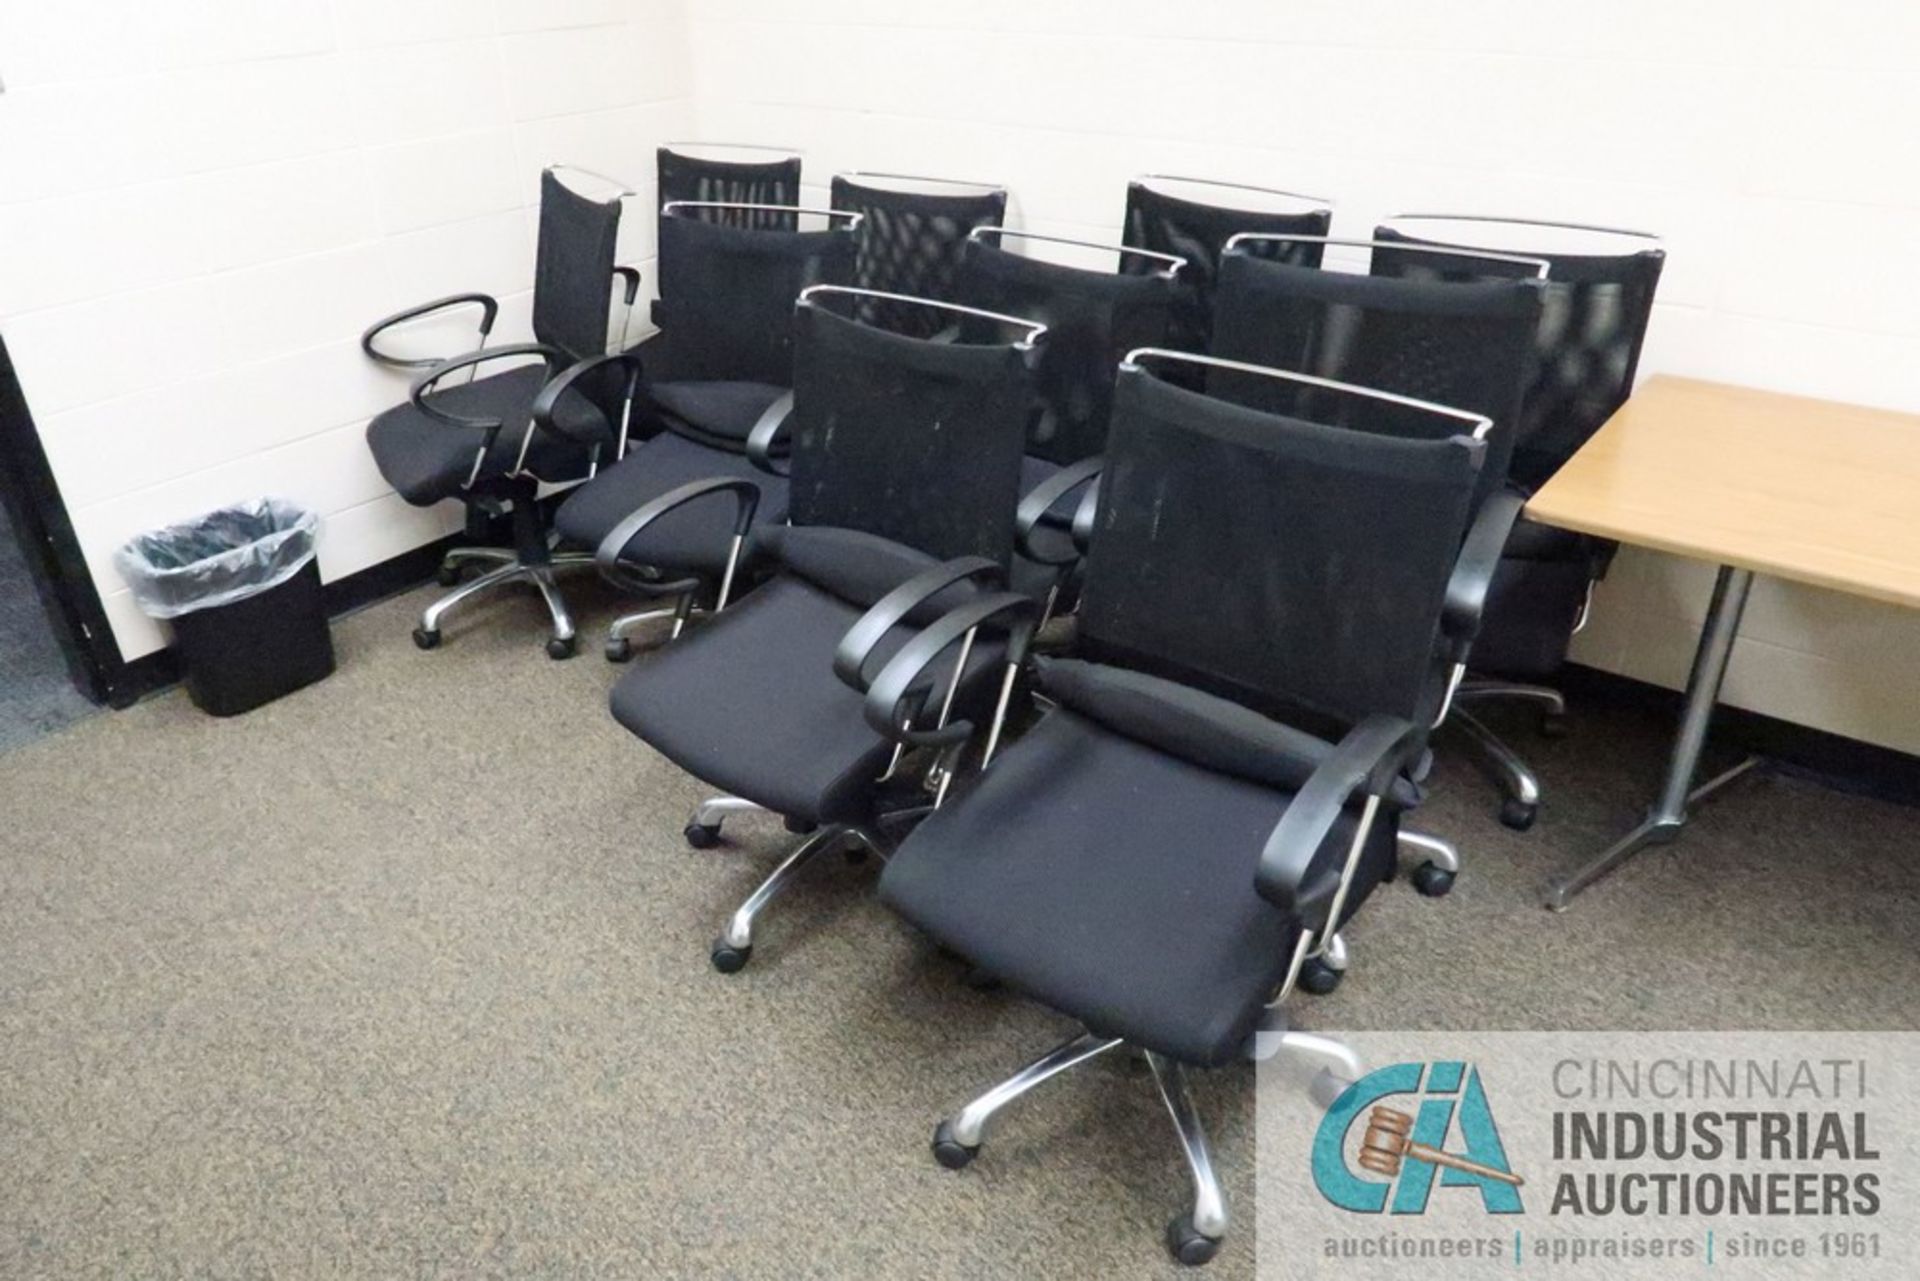 (LOT) (9) 48" TABLES, 6' FOLDING TABLE, BOOKSHELF, (10) CHAIRS, CHALK/DRY BOARD, PROJECTOR SCREEN - Image 6 of 6